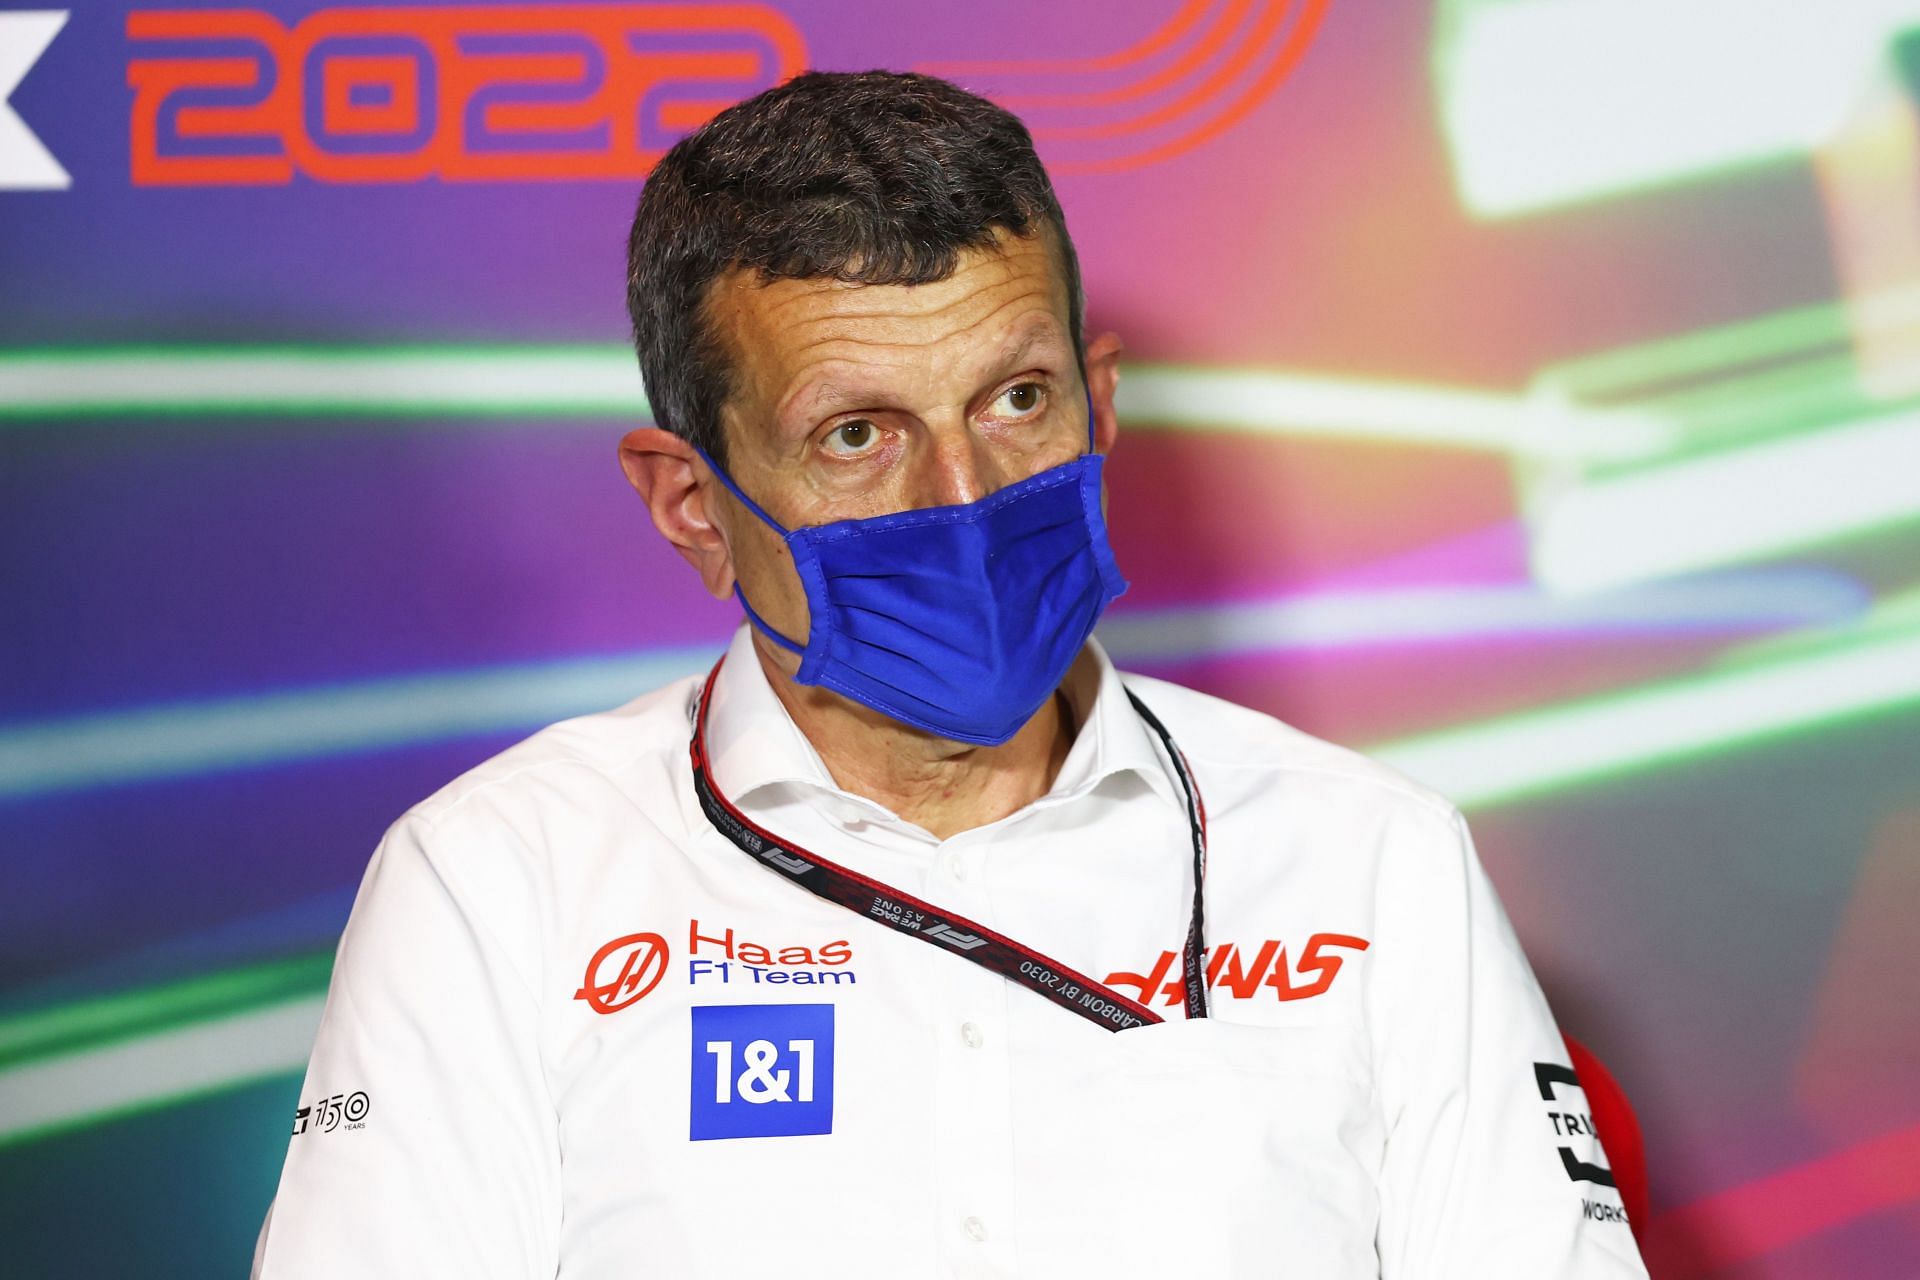 Haas F1 Team Principal Guenther Steiner looks on in the Team Principals Press Conference prior to final practice ahead of the race in Saudi Arabia. (Photo by Lars Baron/Getty Images)